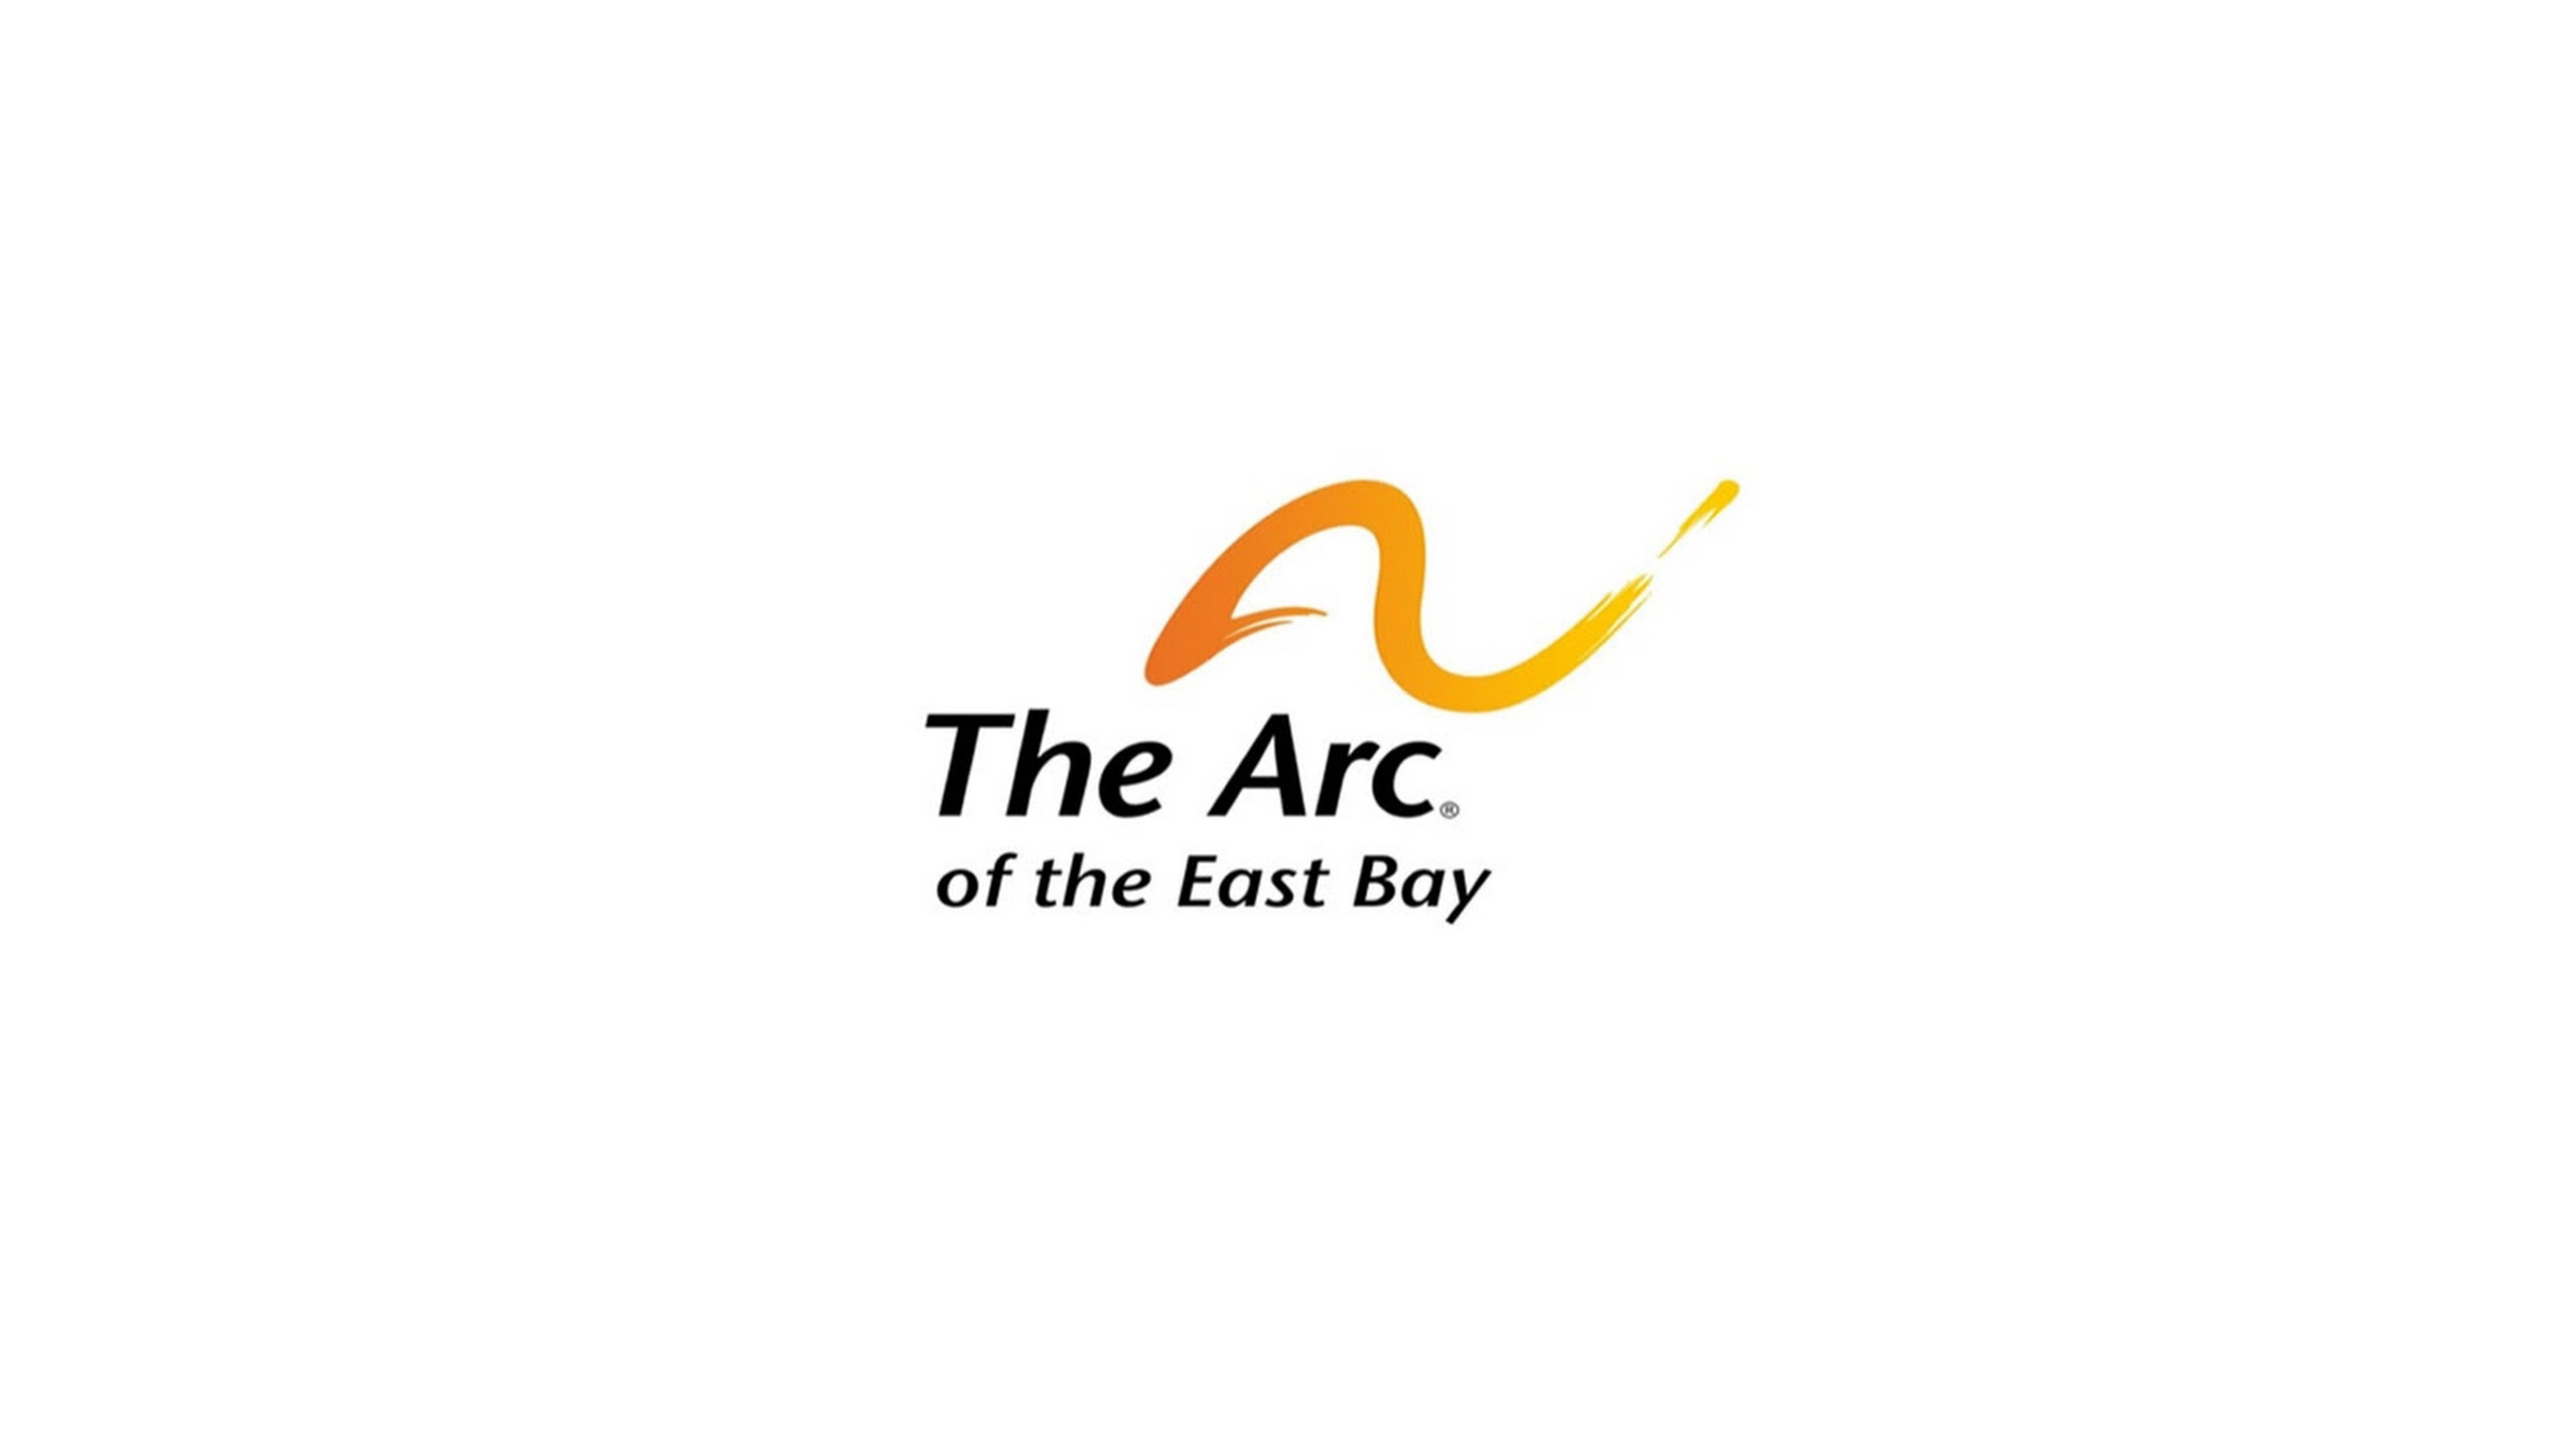 The Arc of the East Bay